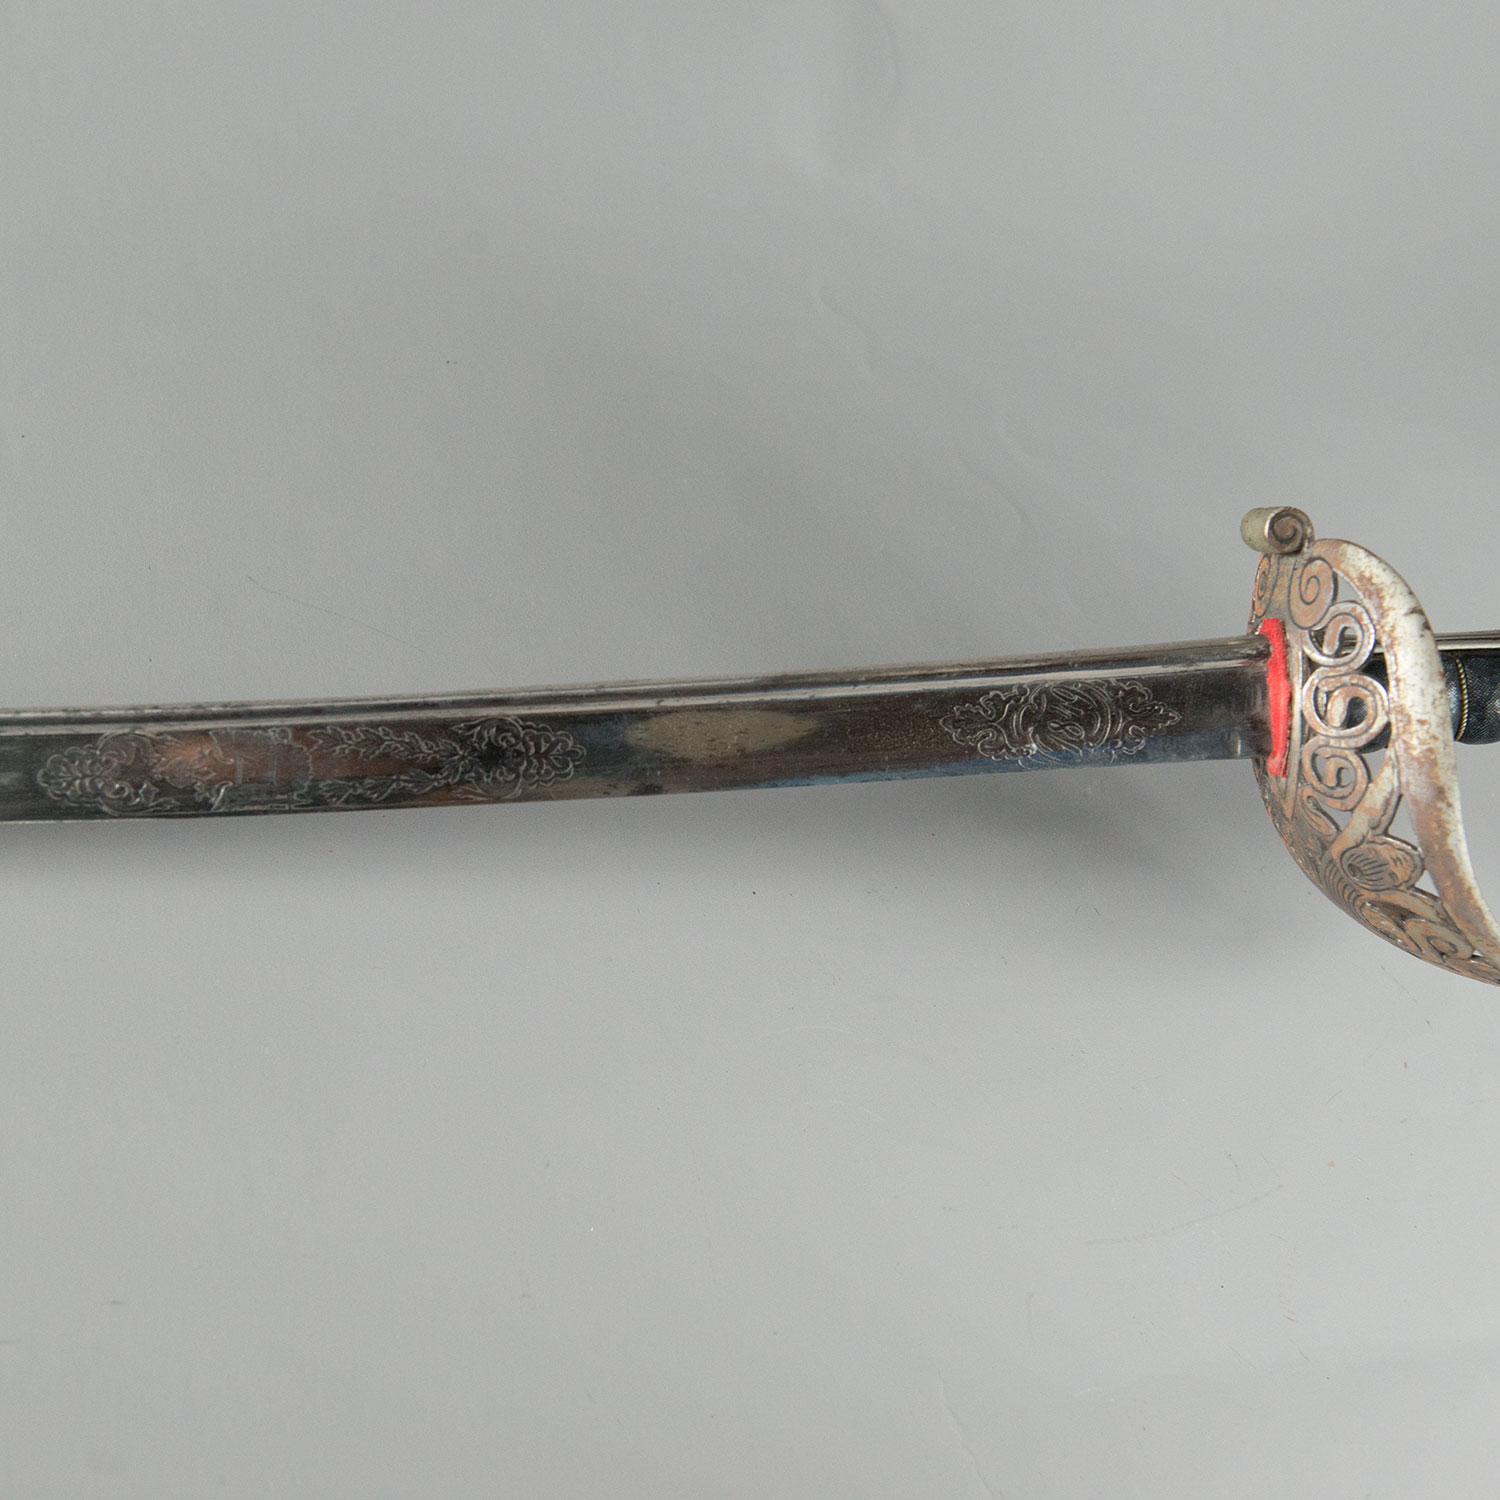 Austro-Hungarian Monarchy Cavalry Saber - Image 3 of 3